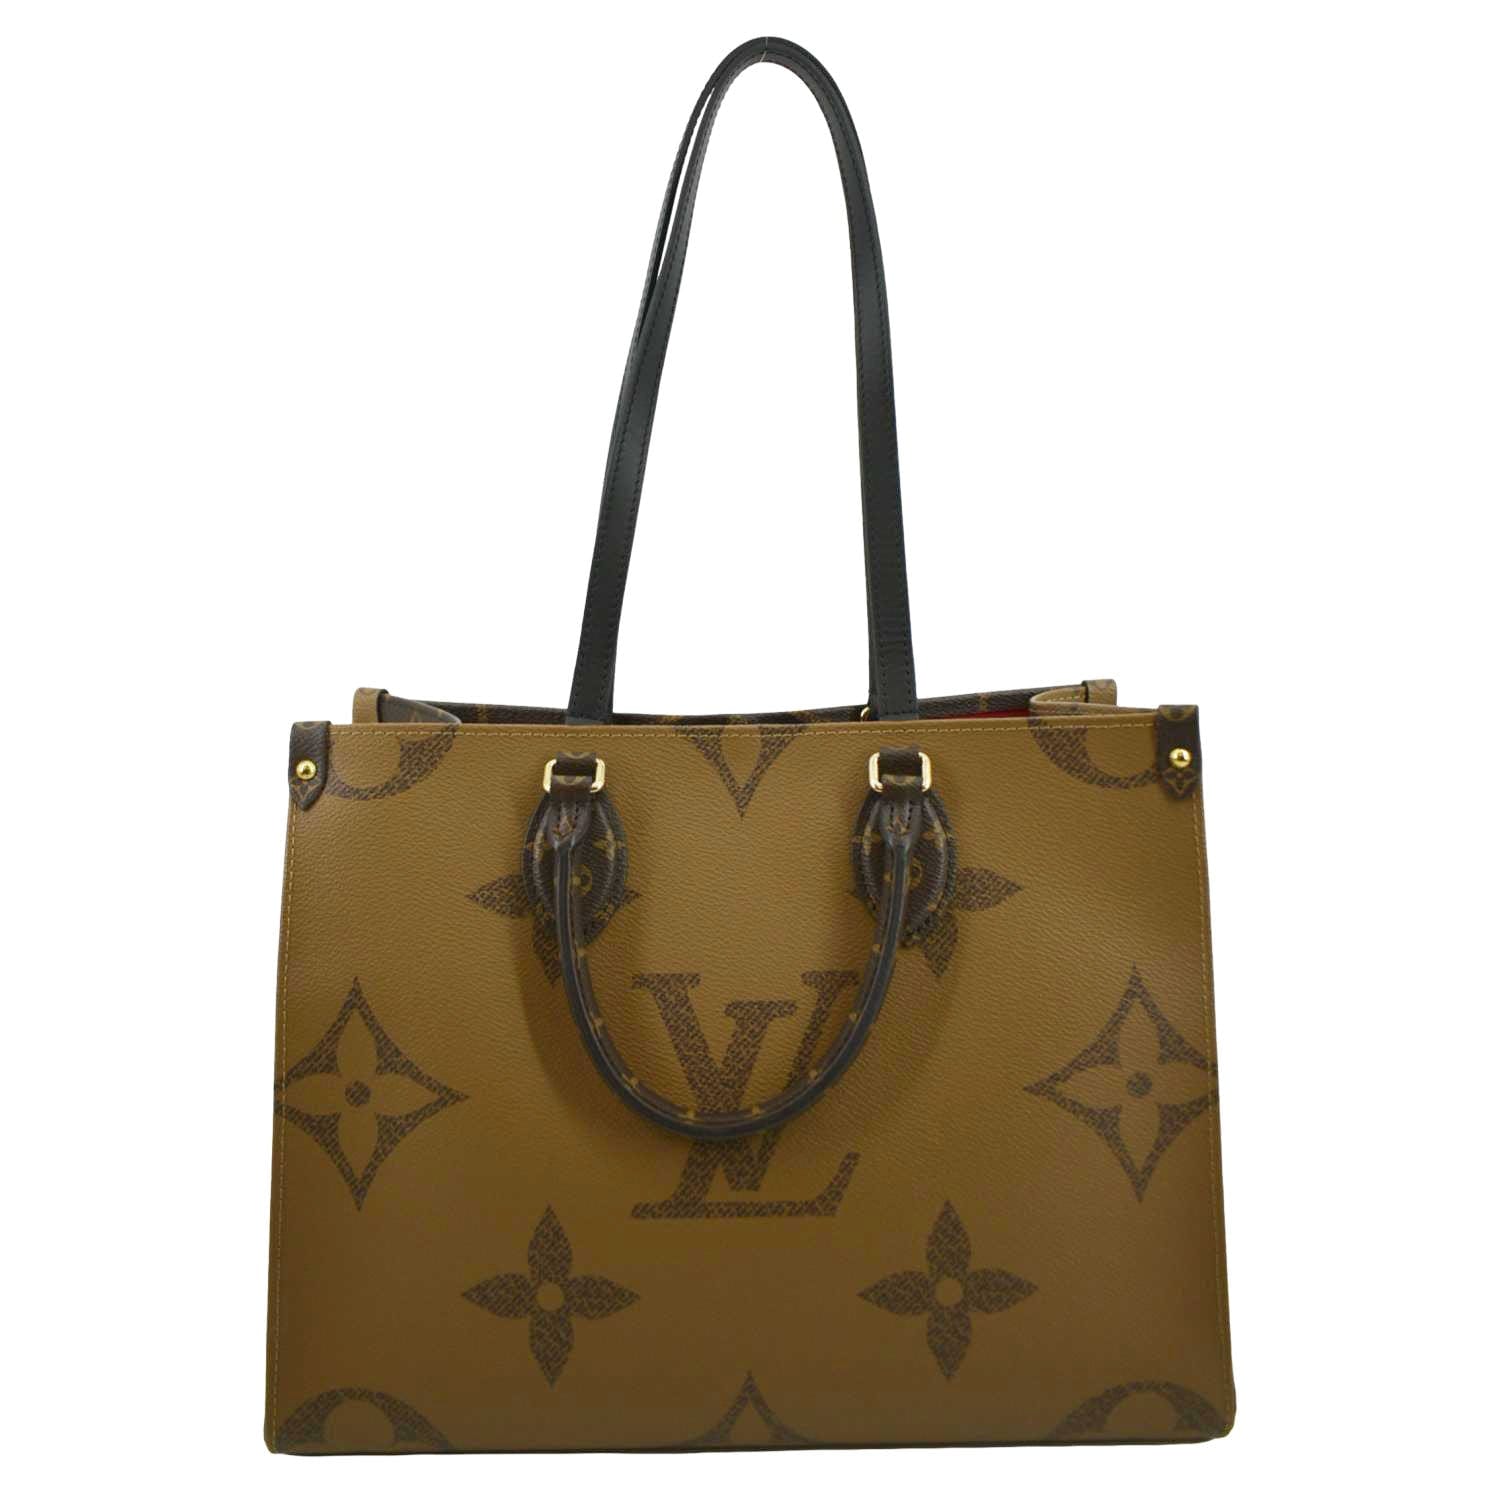 Louis Vuitton OnTheGo MM Bag  Bags, Purses and bags, Purses